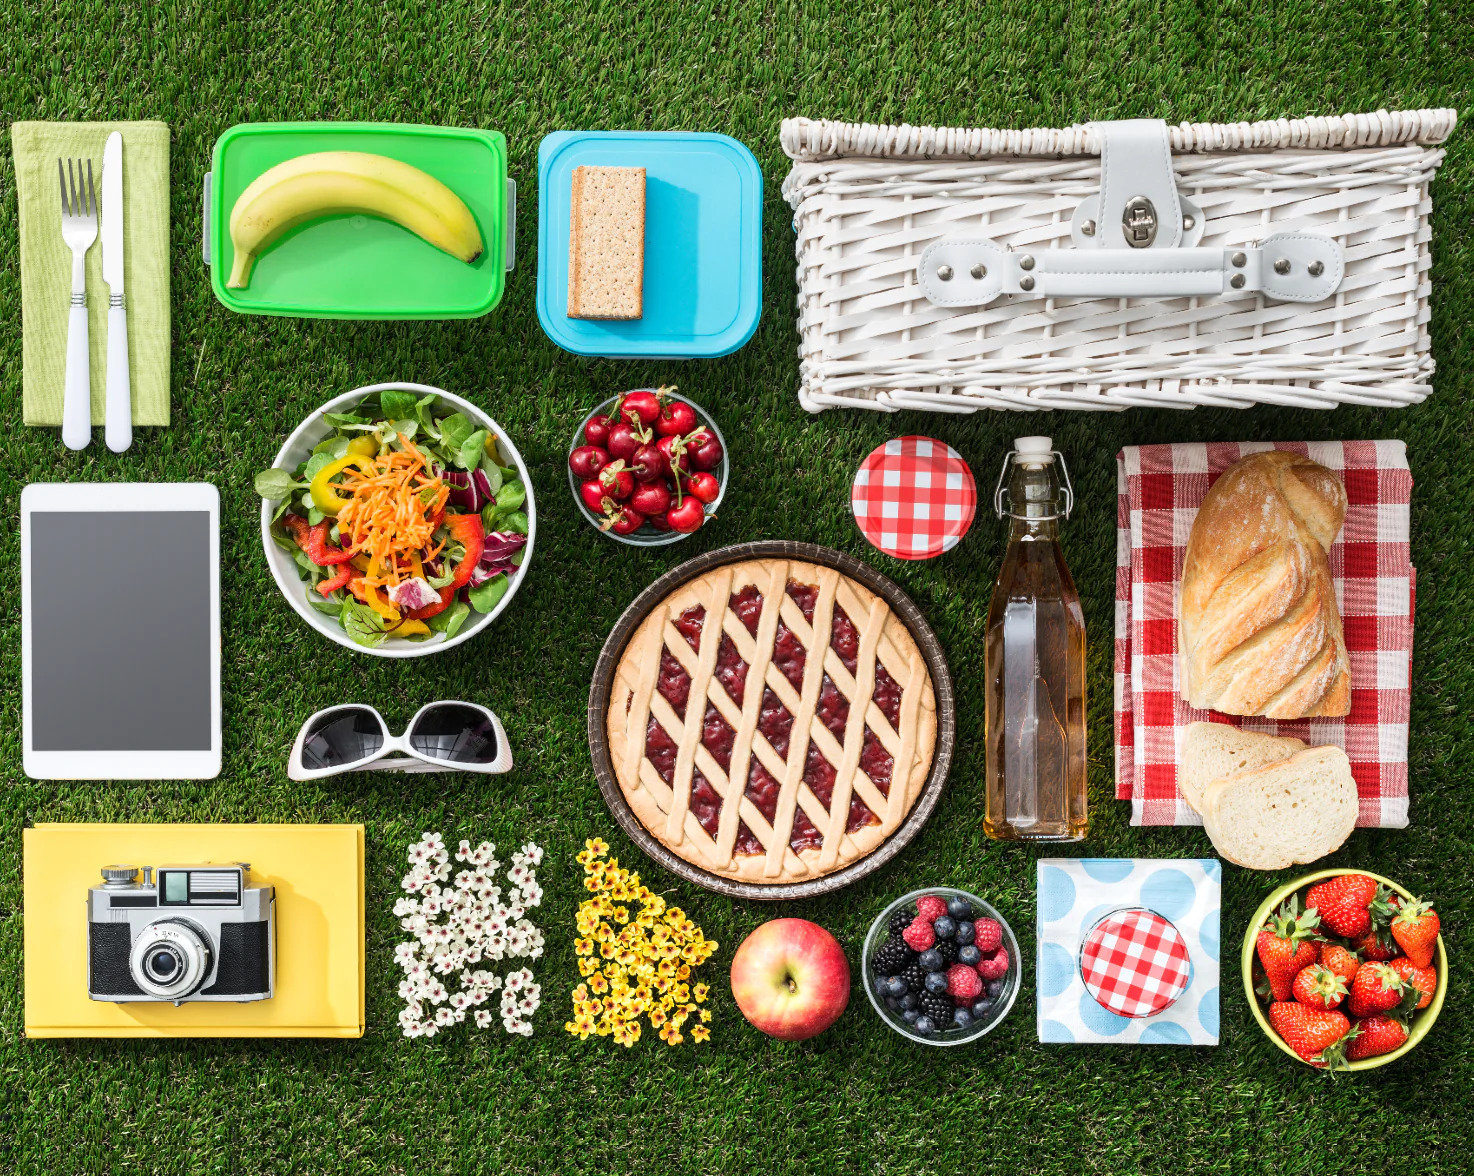 What Food Do You Bring to a Picnic?